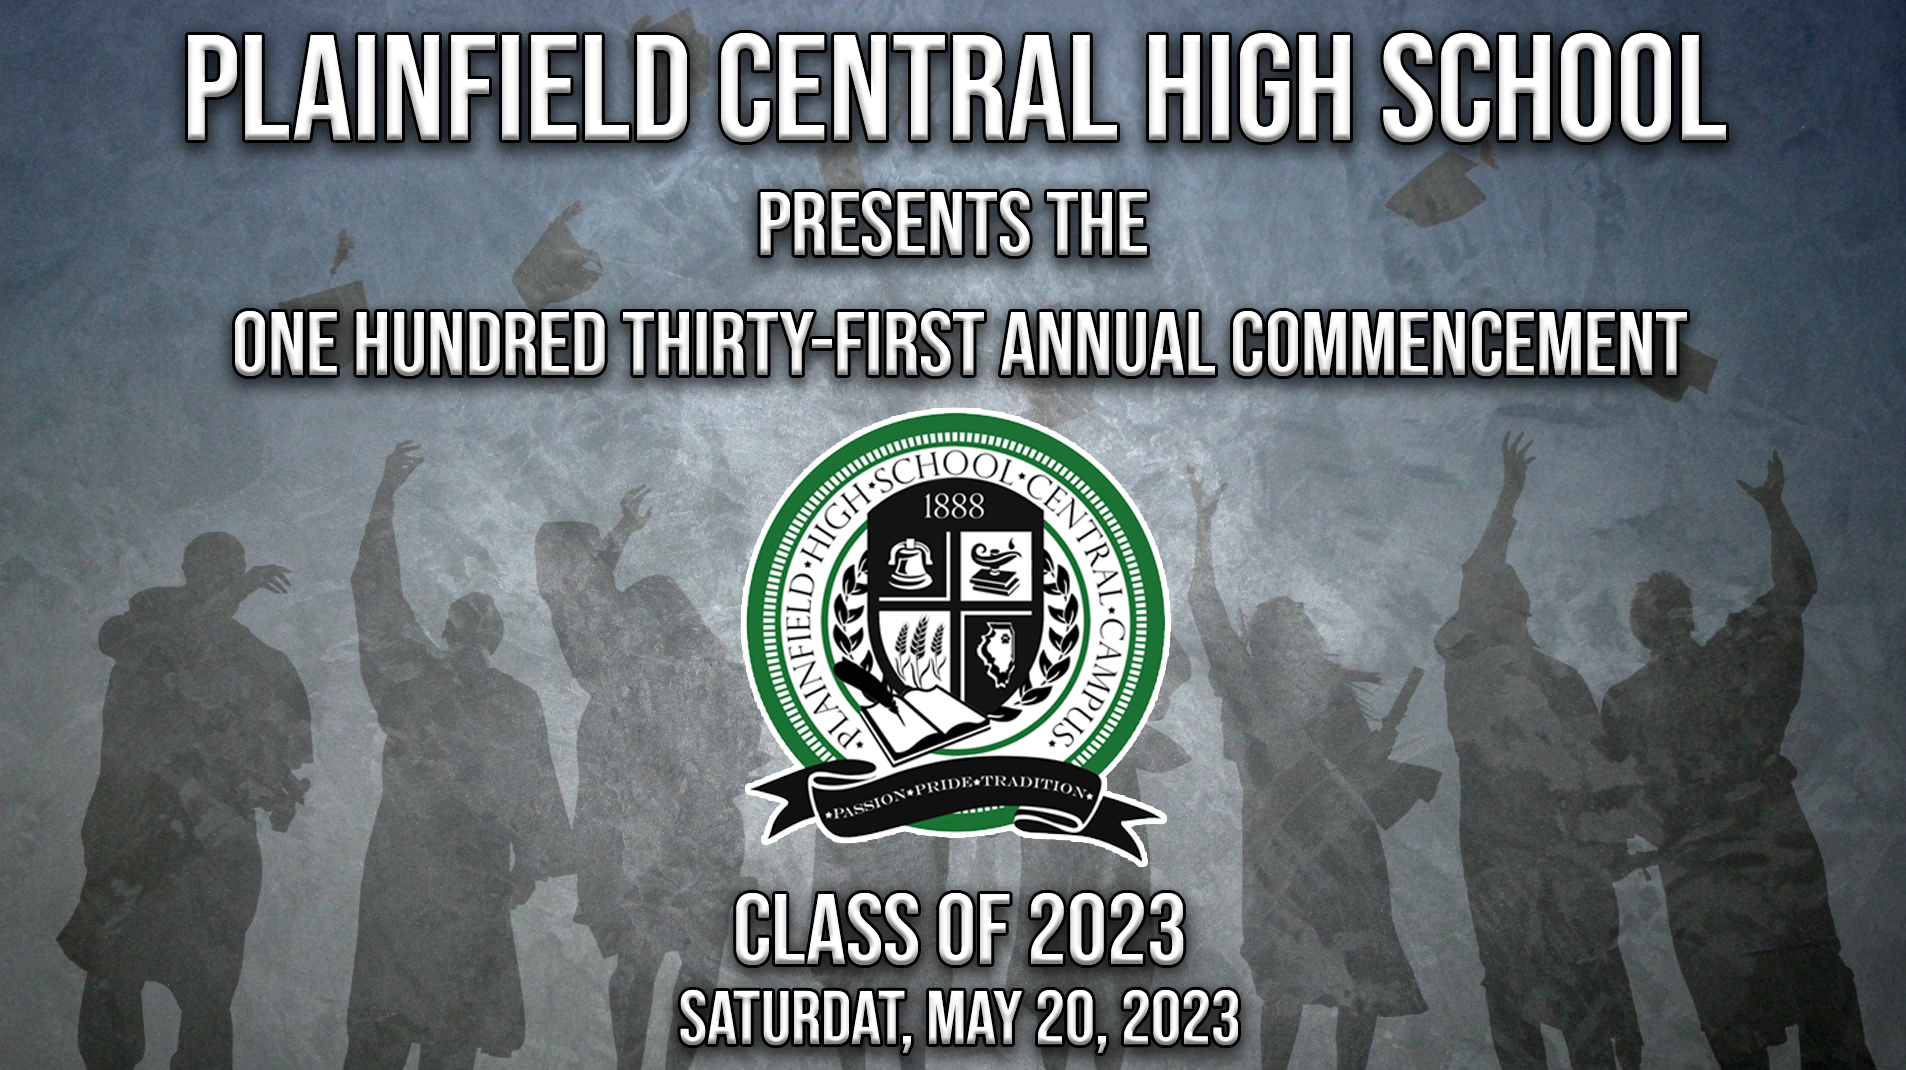 2023 Plainfield High School Central Campus Presents the One